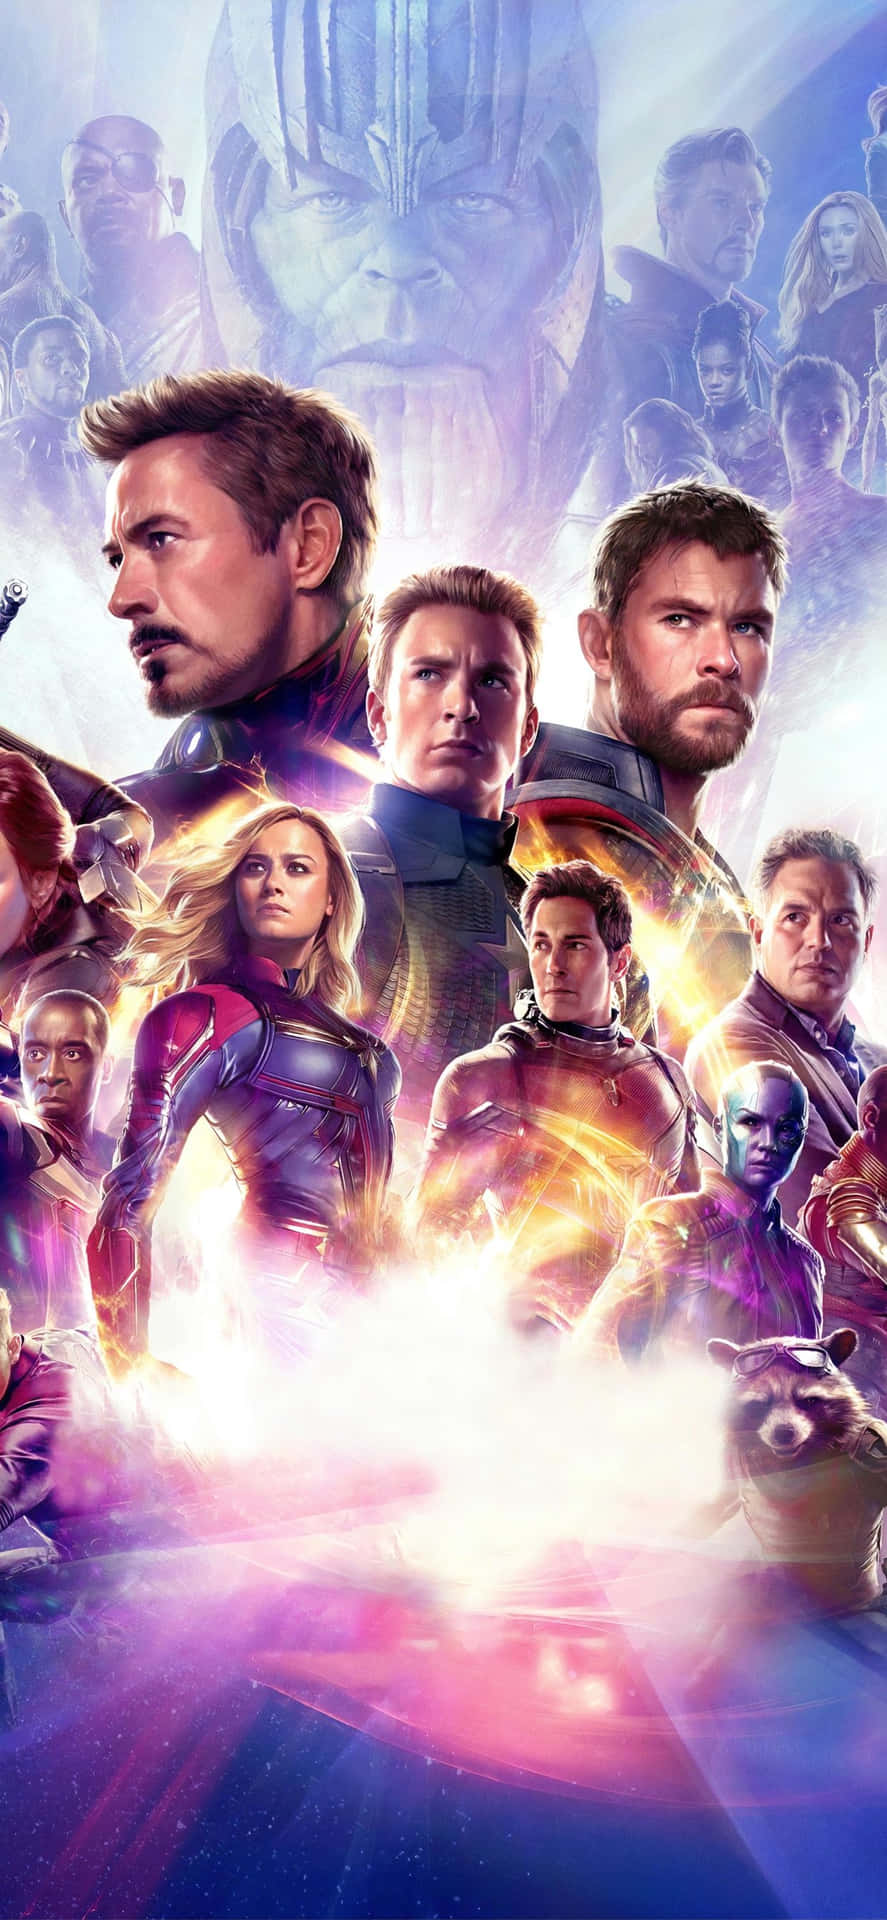 Get ready for a thrilling adventure with the Avengers Endgame Iphone Wallpaper